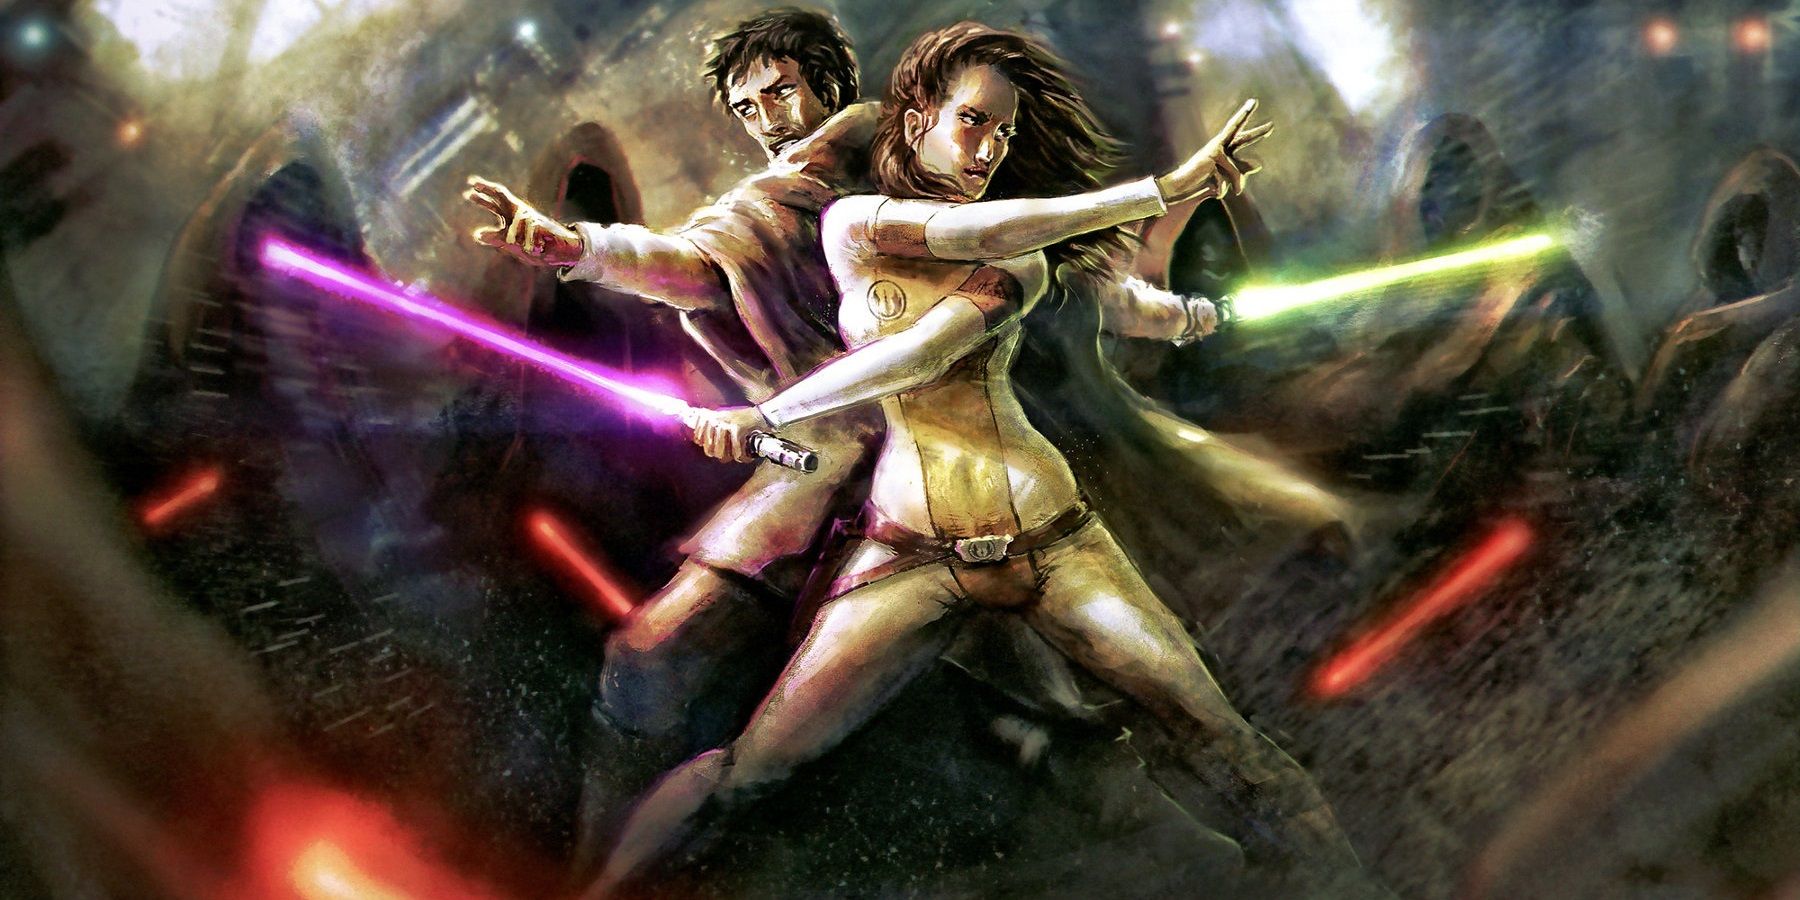 Jaina Solo fighting alongside her brother Jacen before his fall to the dark side.